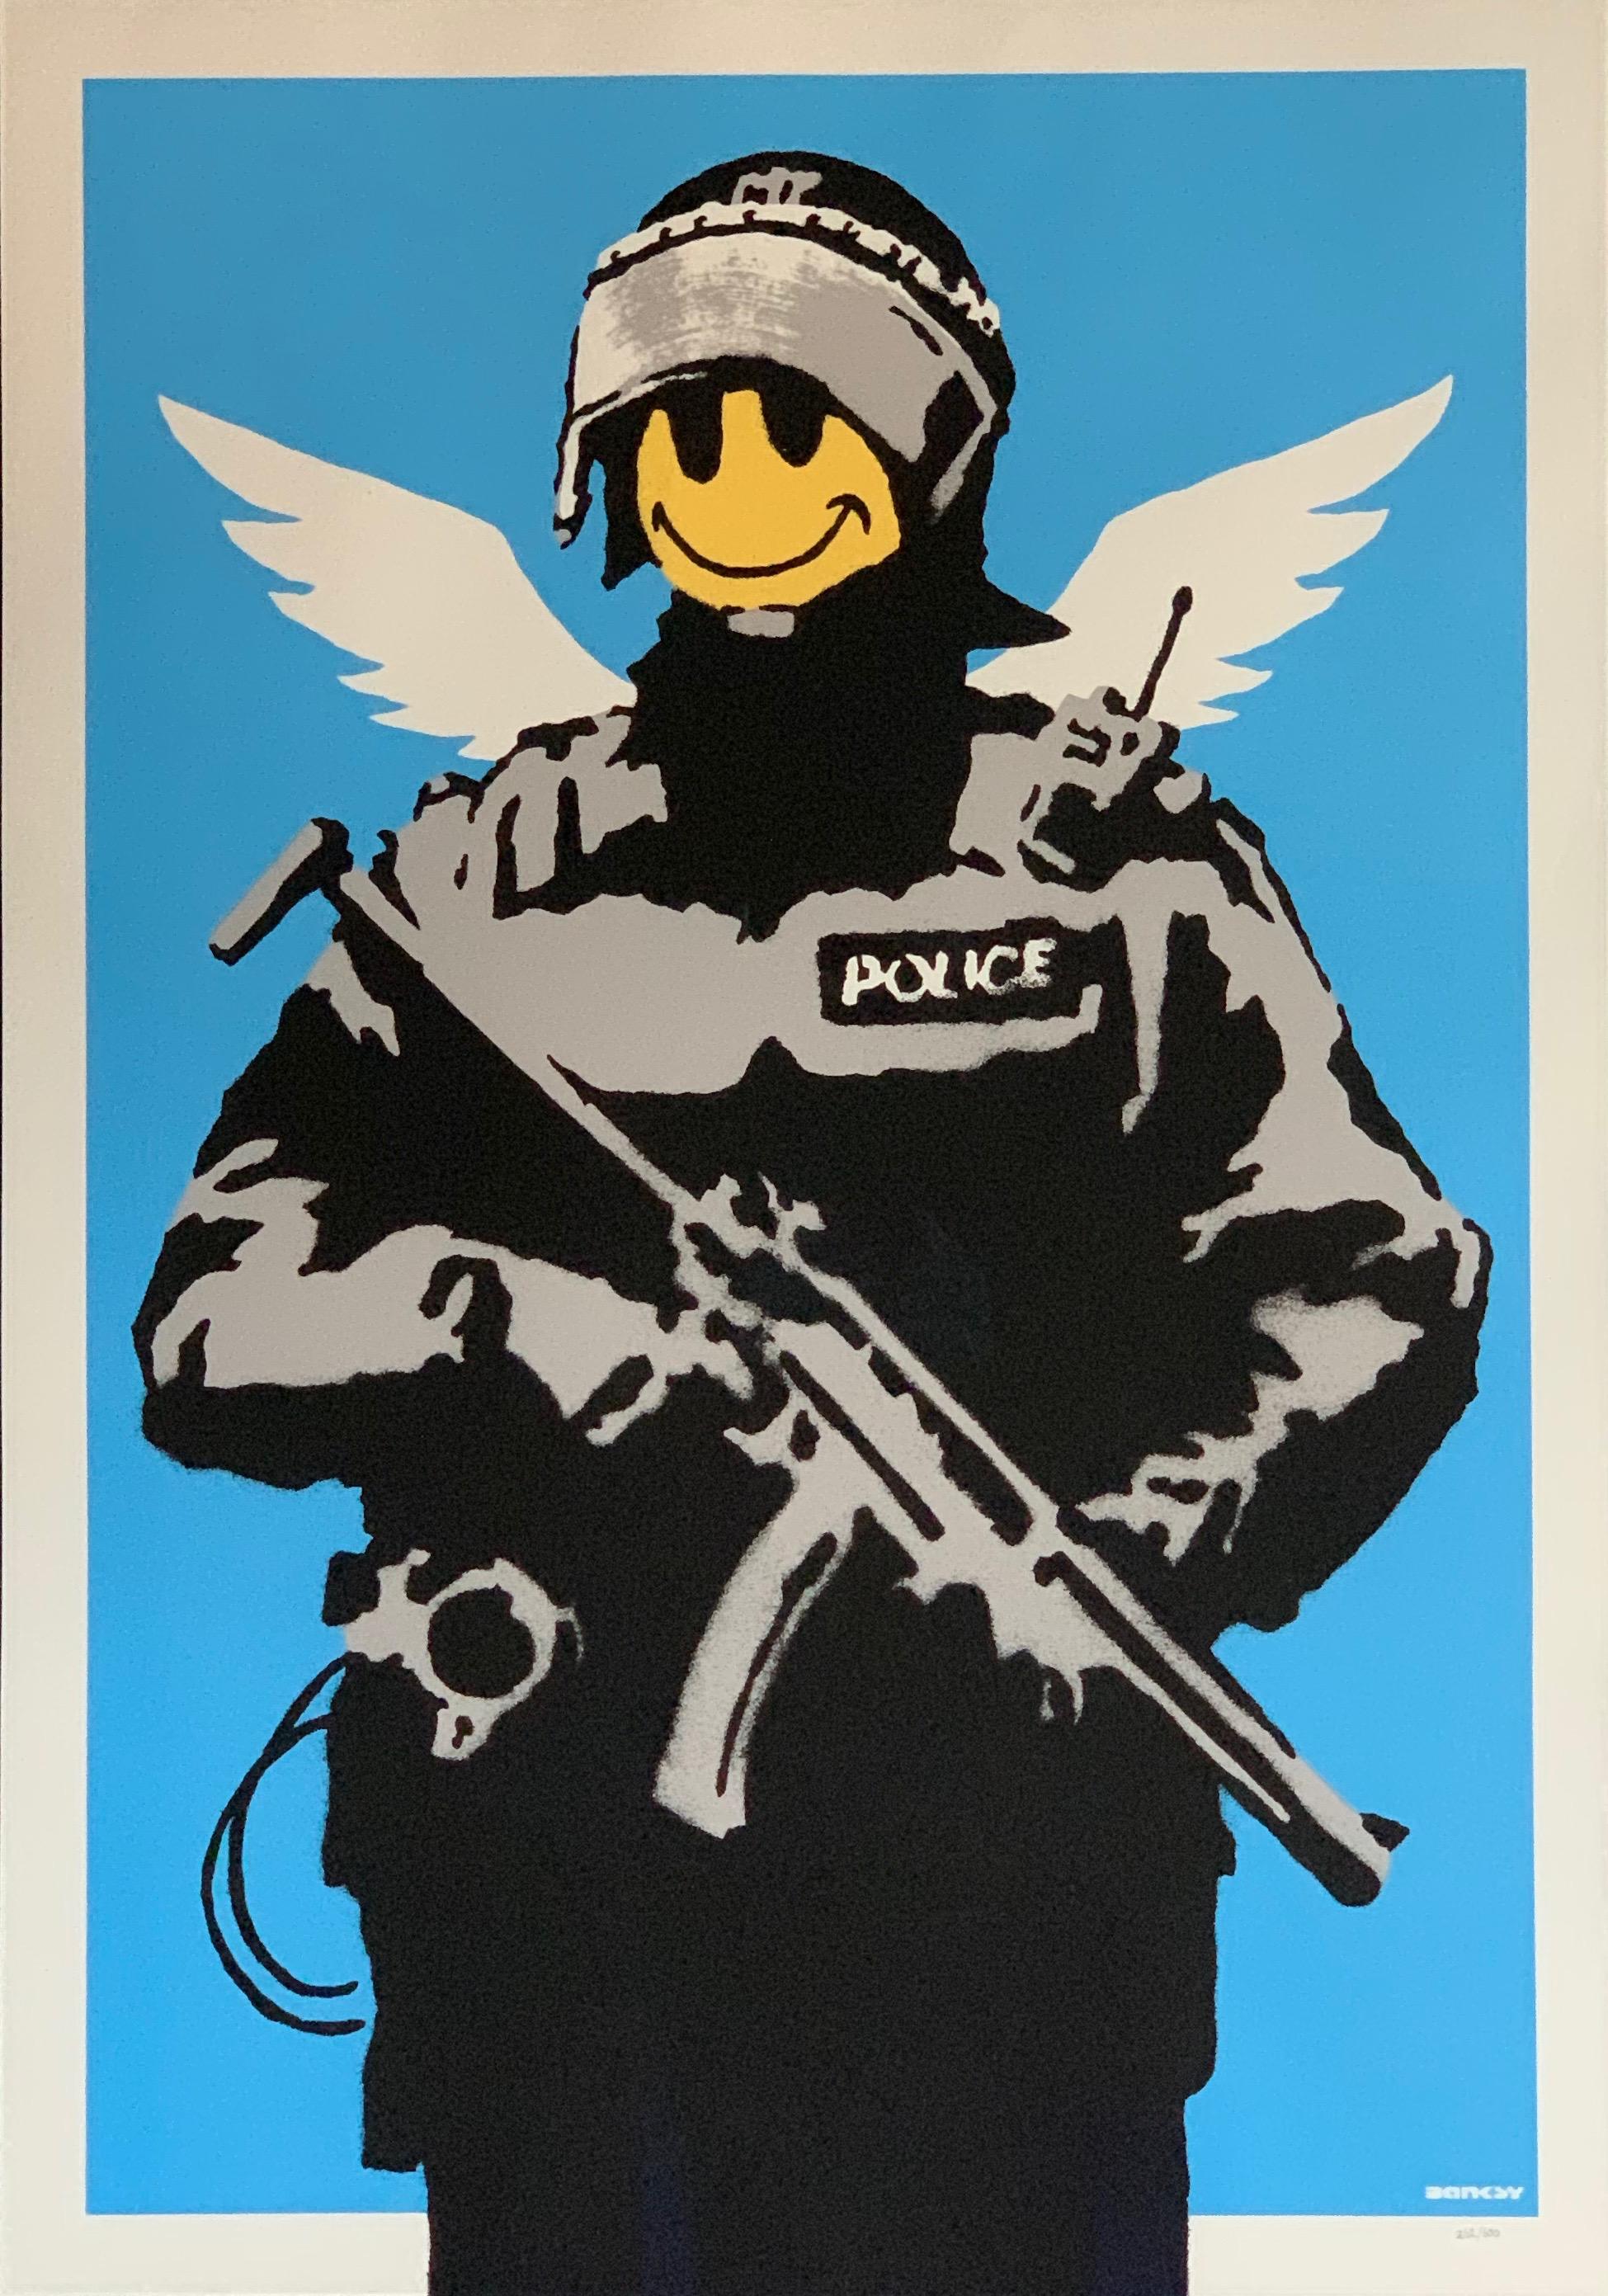 Flying Copper Banksy 2003 unsigned

Flying Copper is an early iconic image from Banksy. The work shows a heavily armed British police officer with little angel wings and a yellow smiley face. Flying Copper was visible under the form of giant